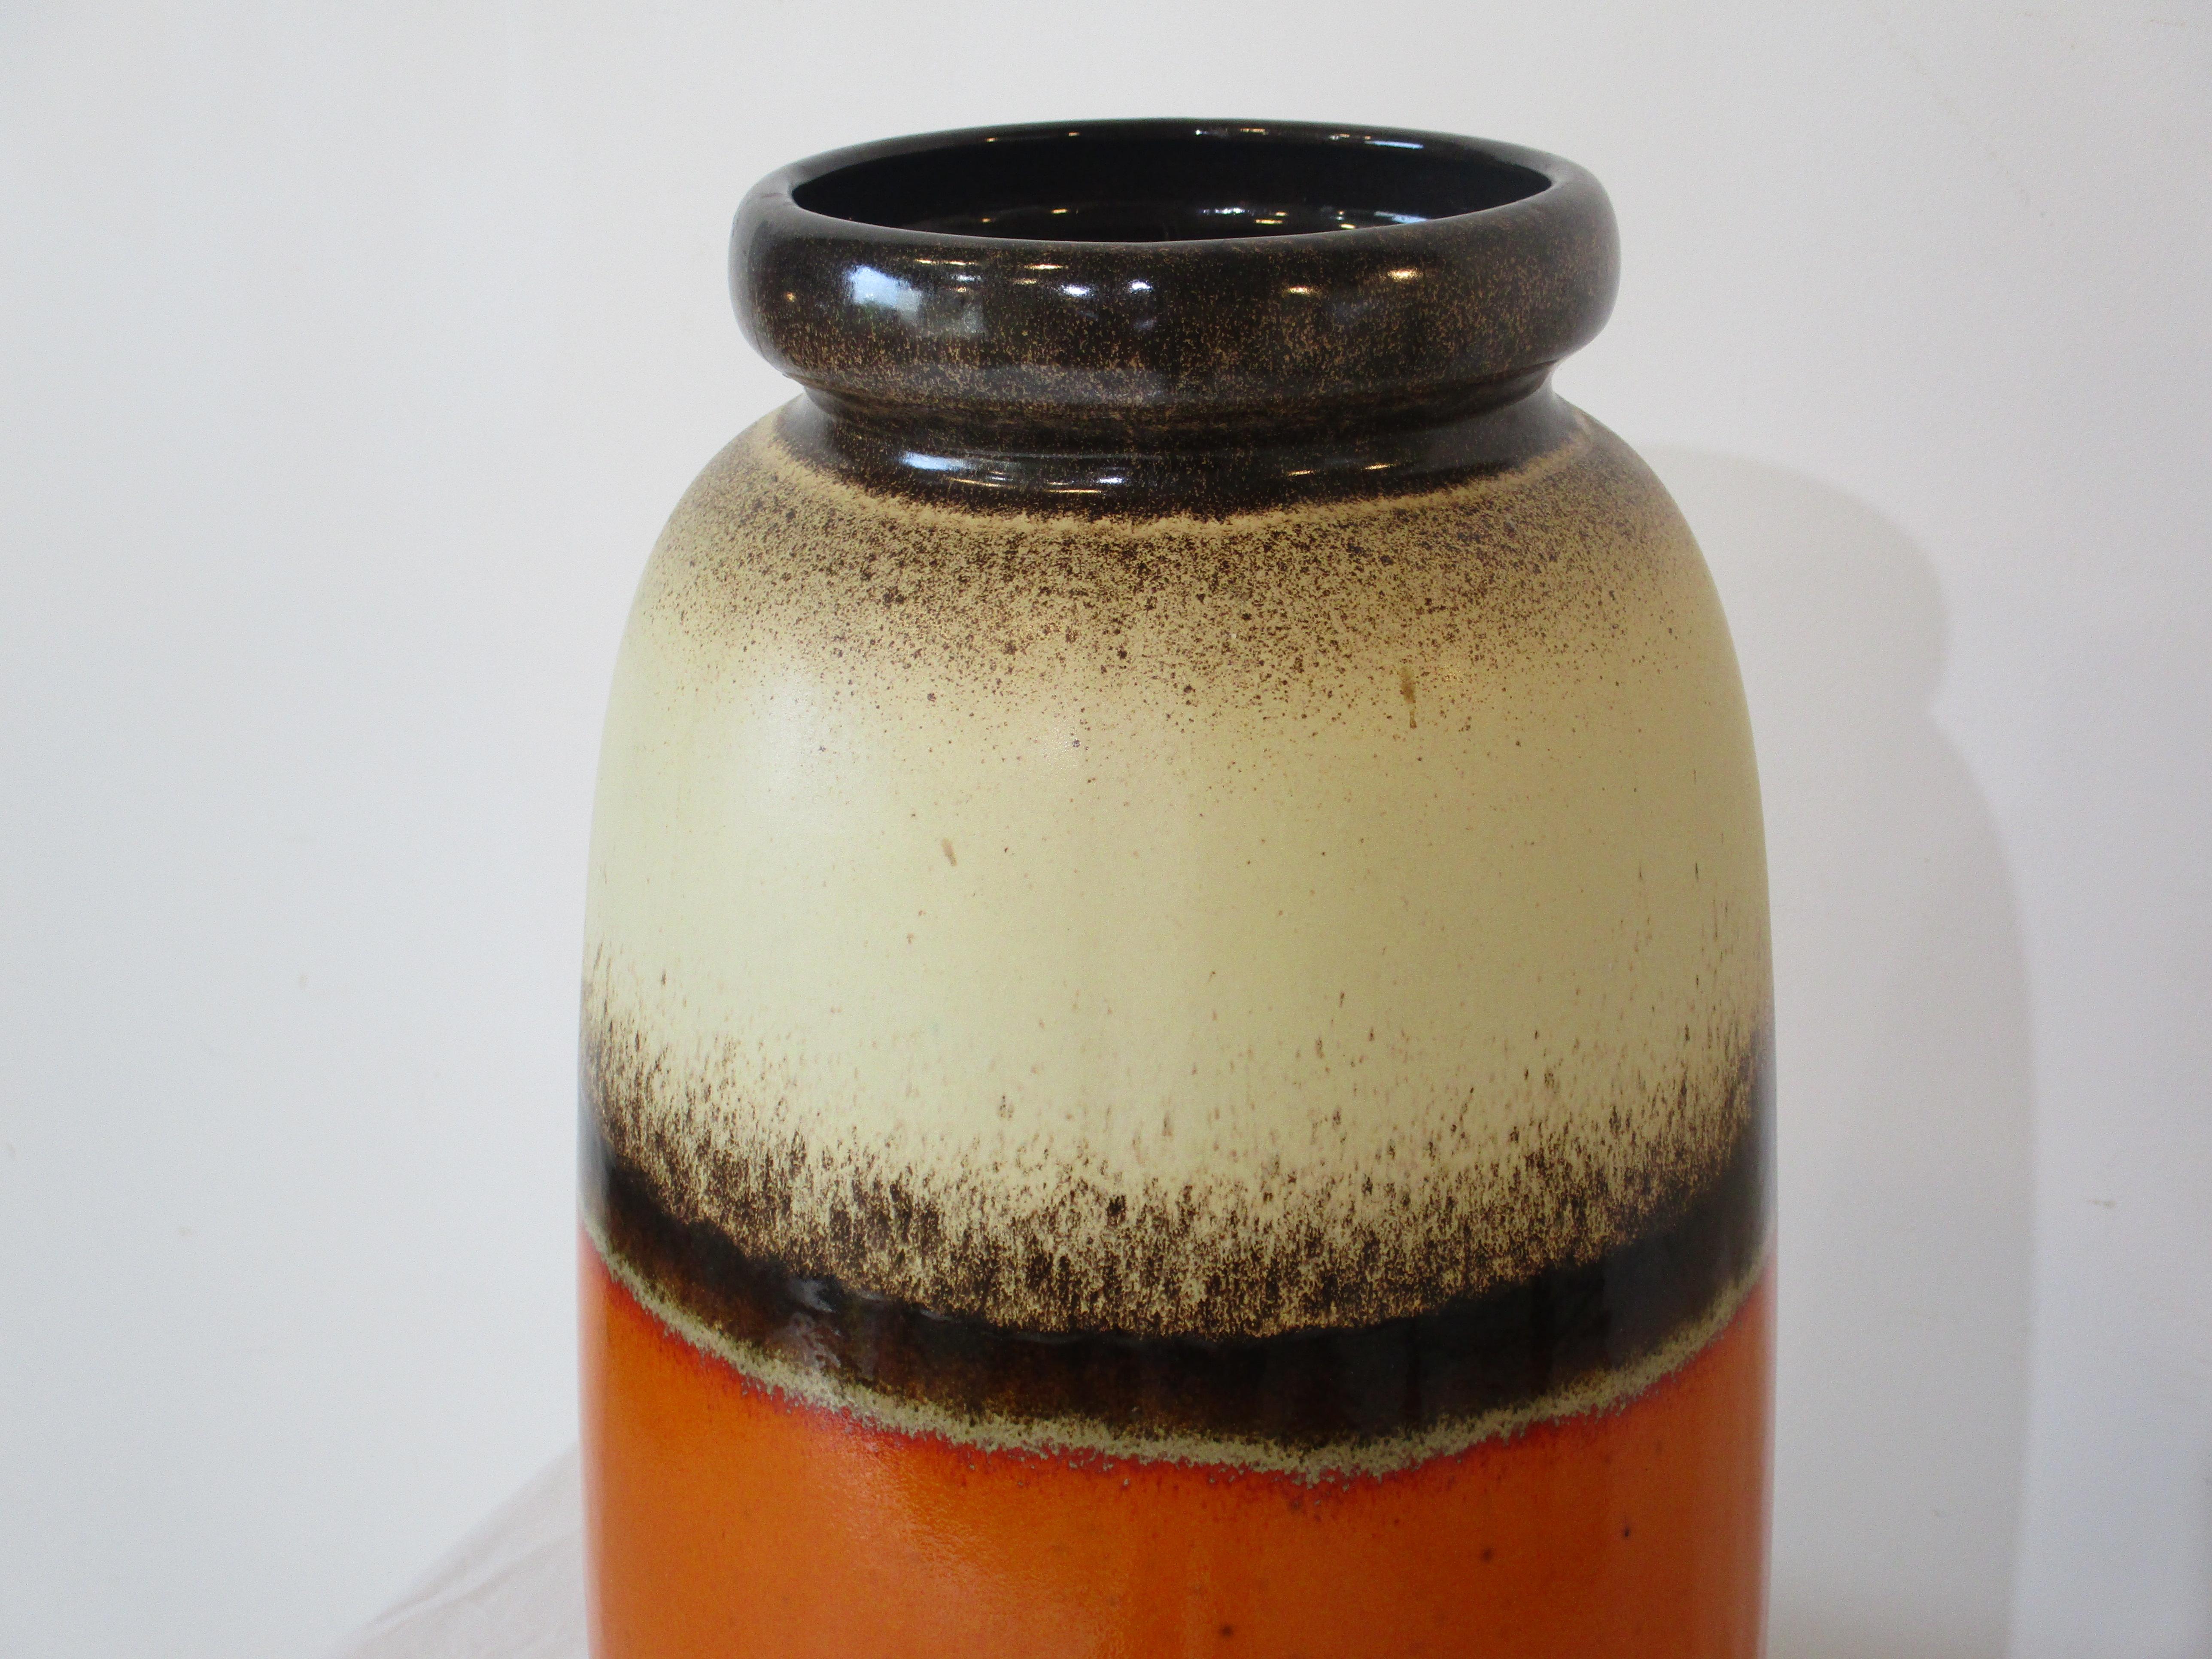 A very large Fat Lava ceramic pottery vase with a tan body having brown, dark brown and a orange glaze to the middle. Fine splatter affect to the edges and the colors give this piece a great Mid Century vibe. Crafted in Germay by Scheurich.